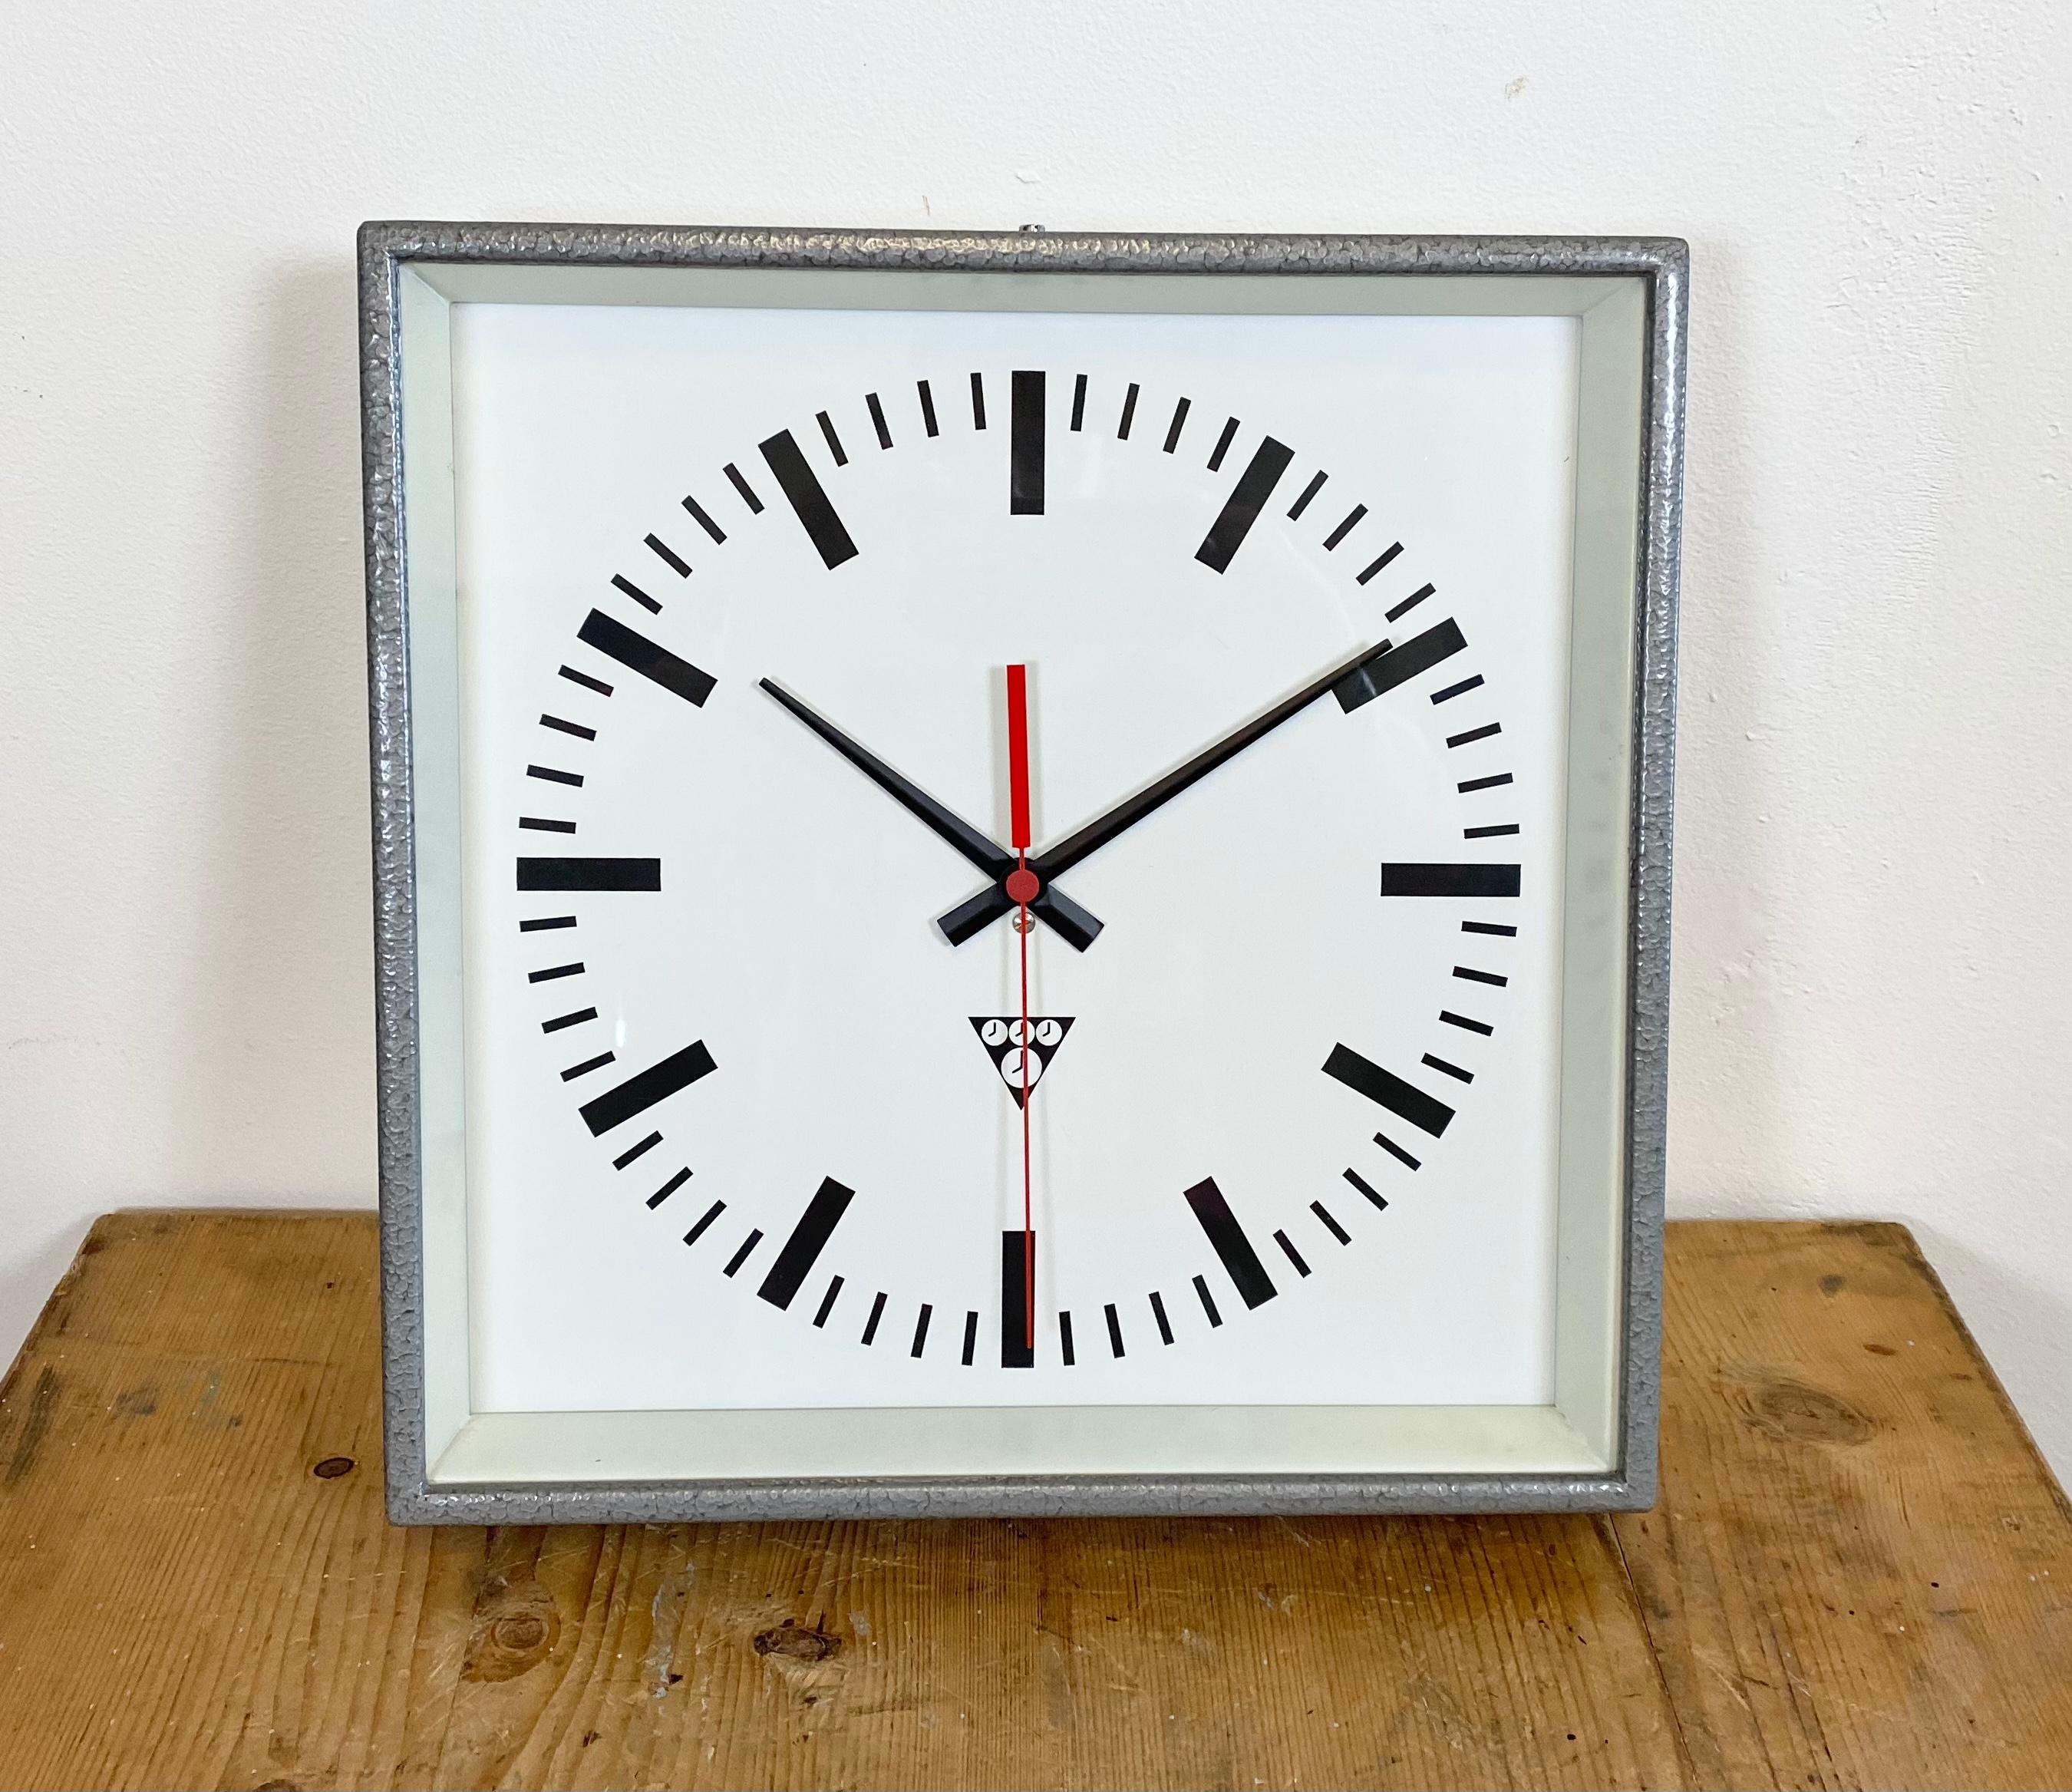 - Clock made by Pragotron in former Czechoslovakia during the 1970s 
- Was used in factories, schools and railway stations 
- Grey hammerpaint metal body 
- Aluminium dial and hands 
- Clear glass cover 
- This item has been converted into a